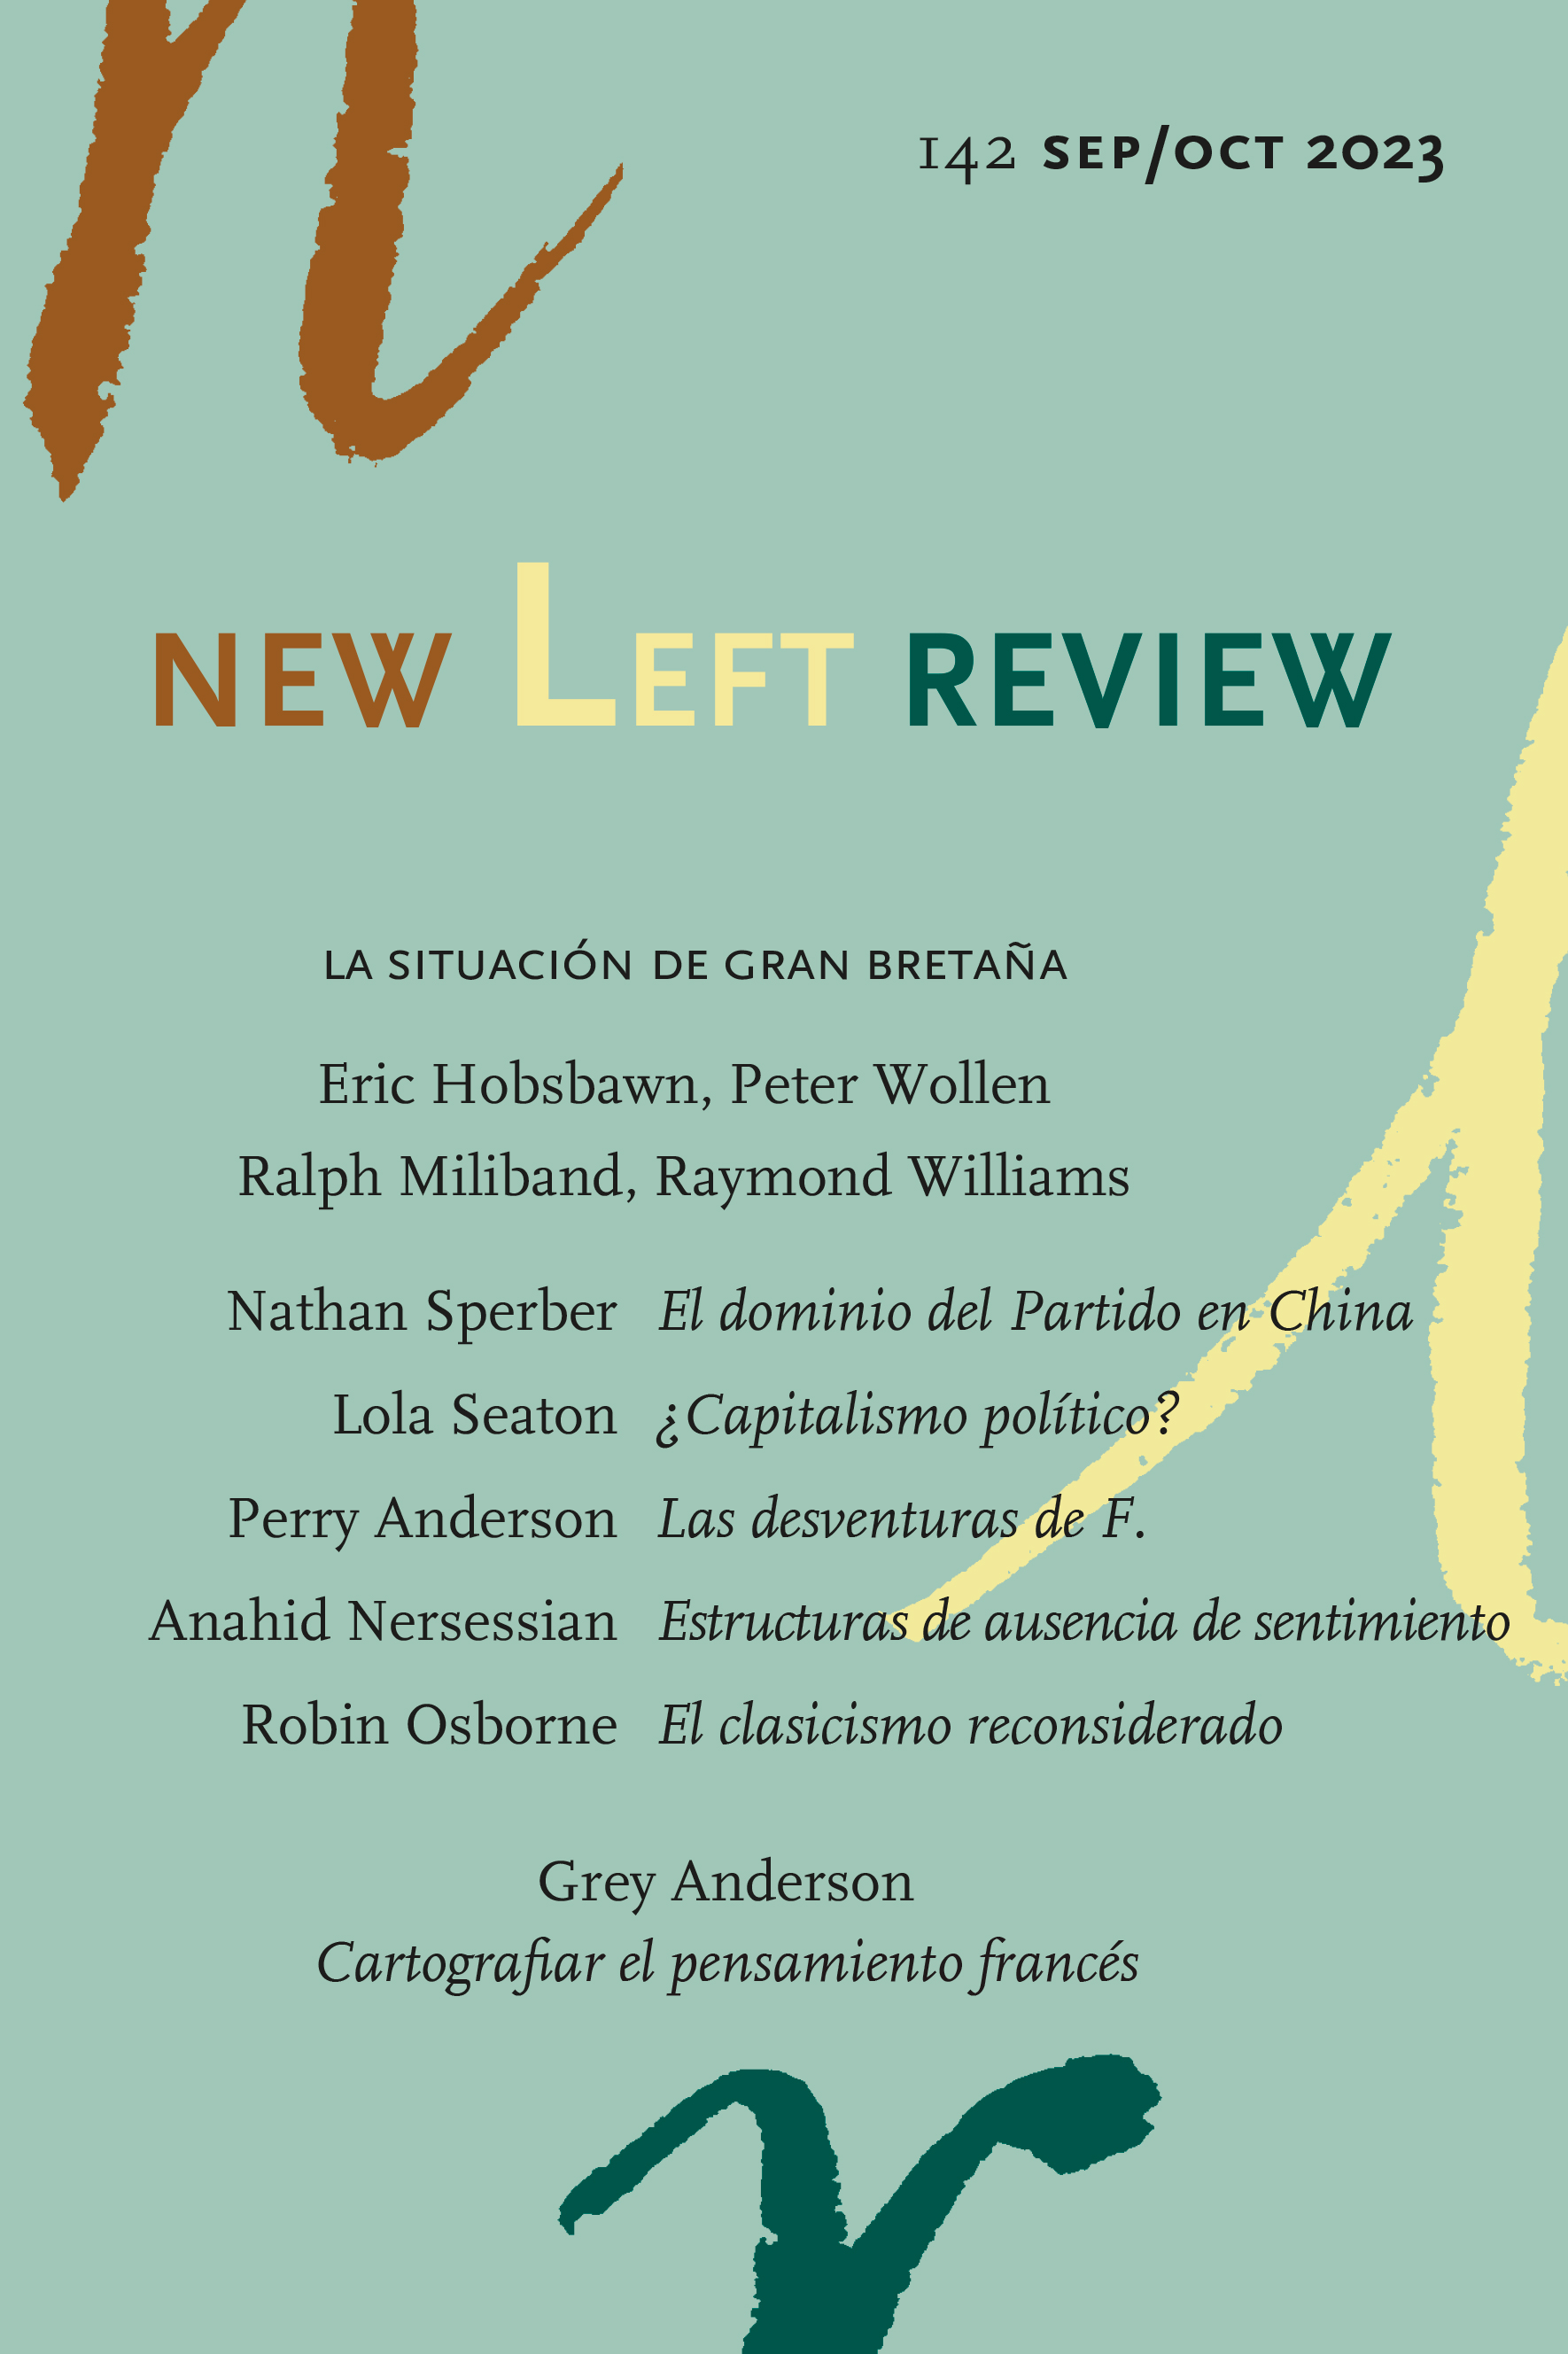 New Left Review #142 - VVAA